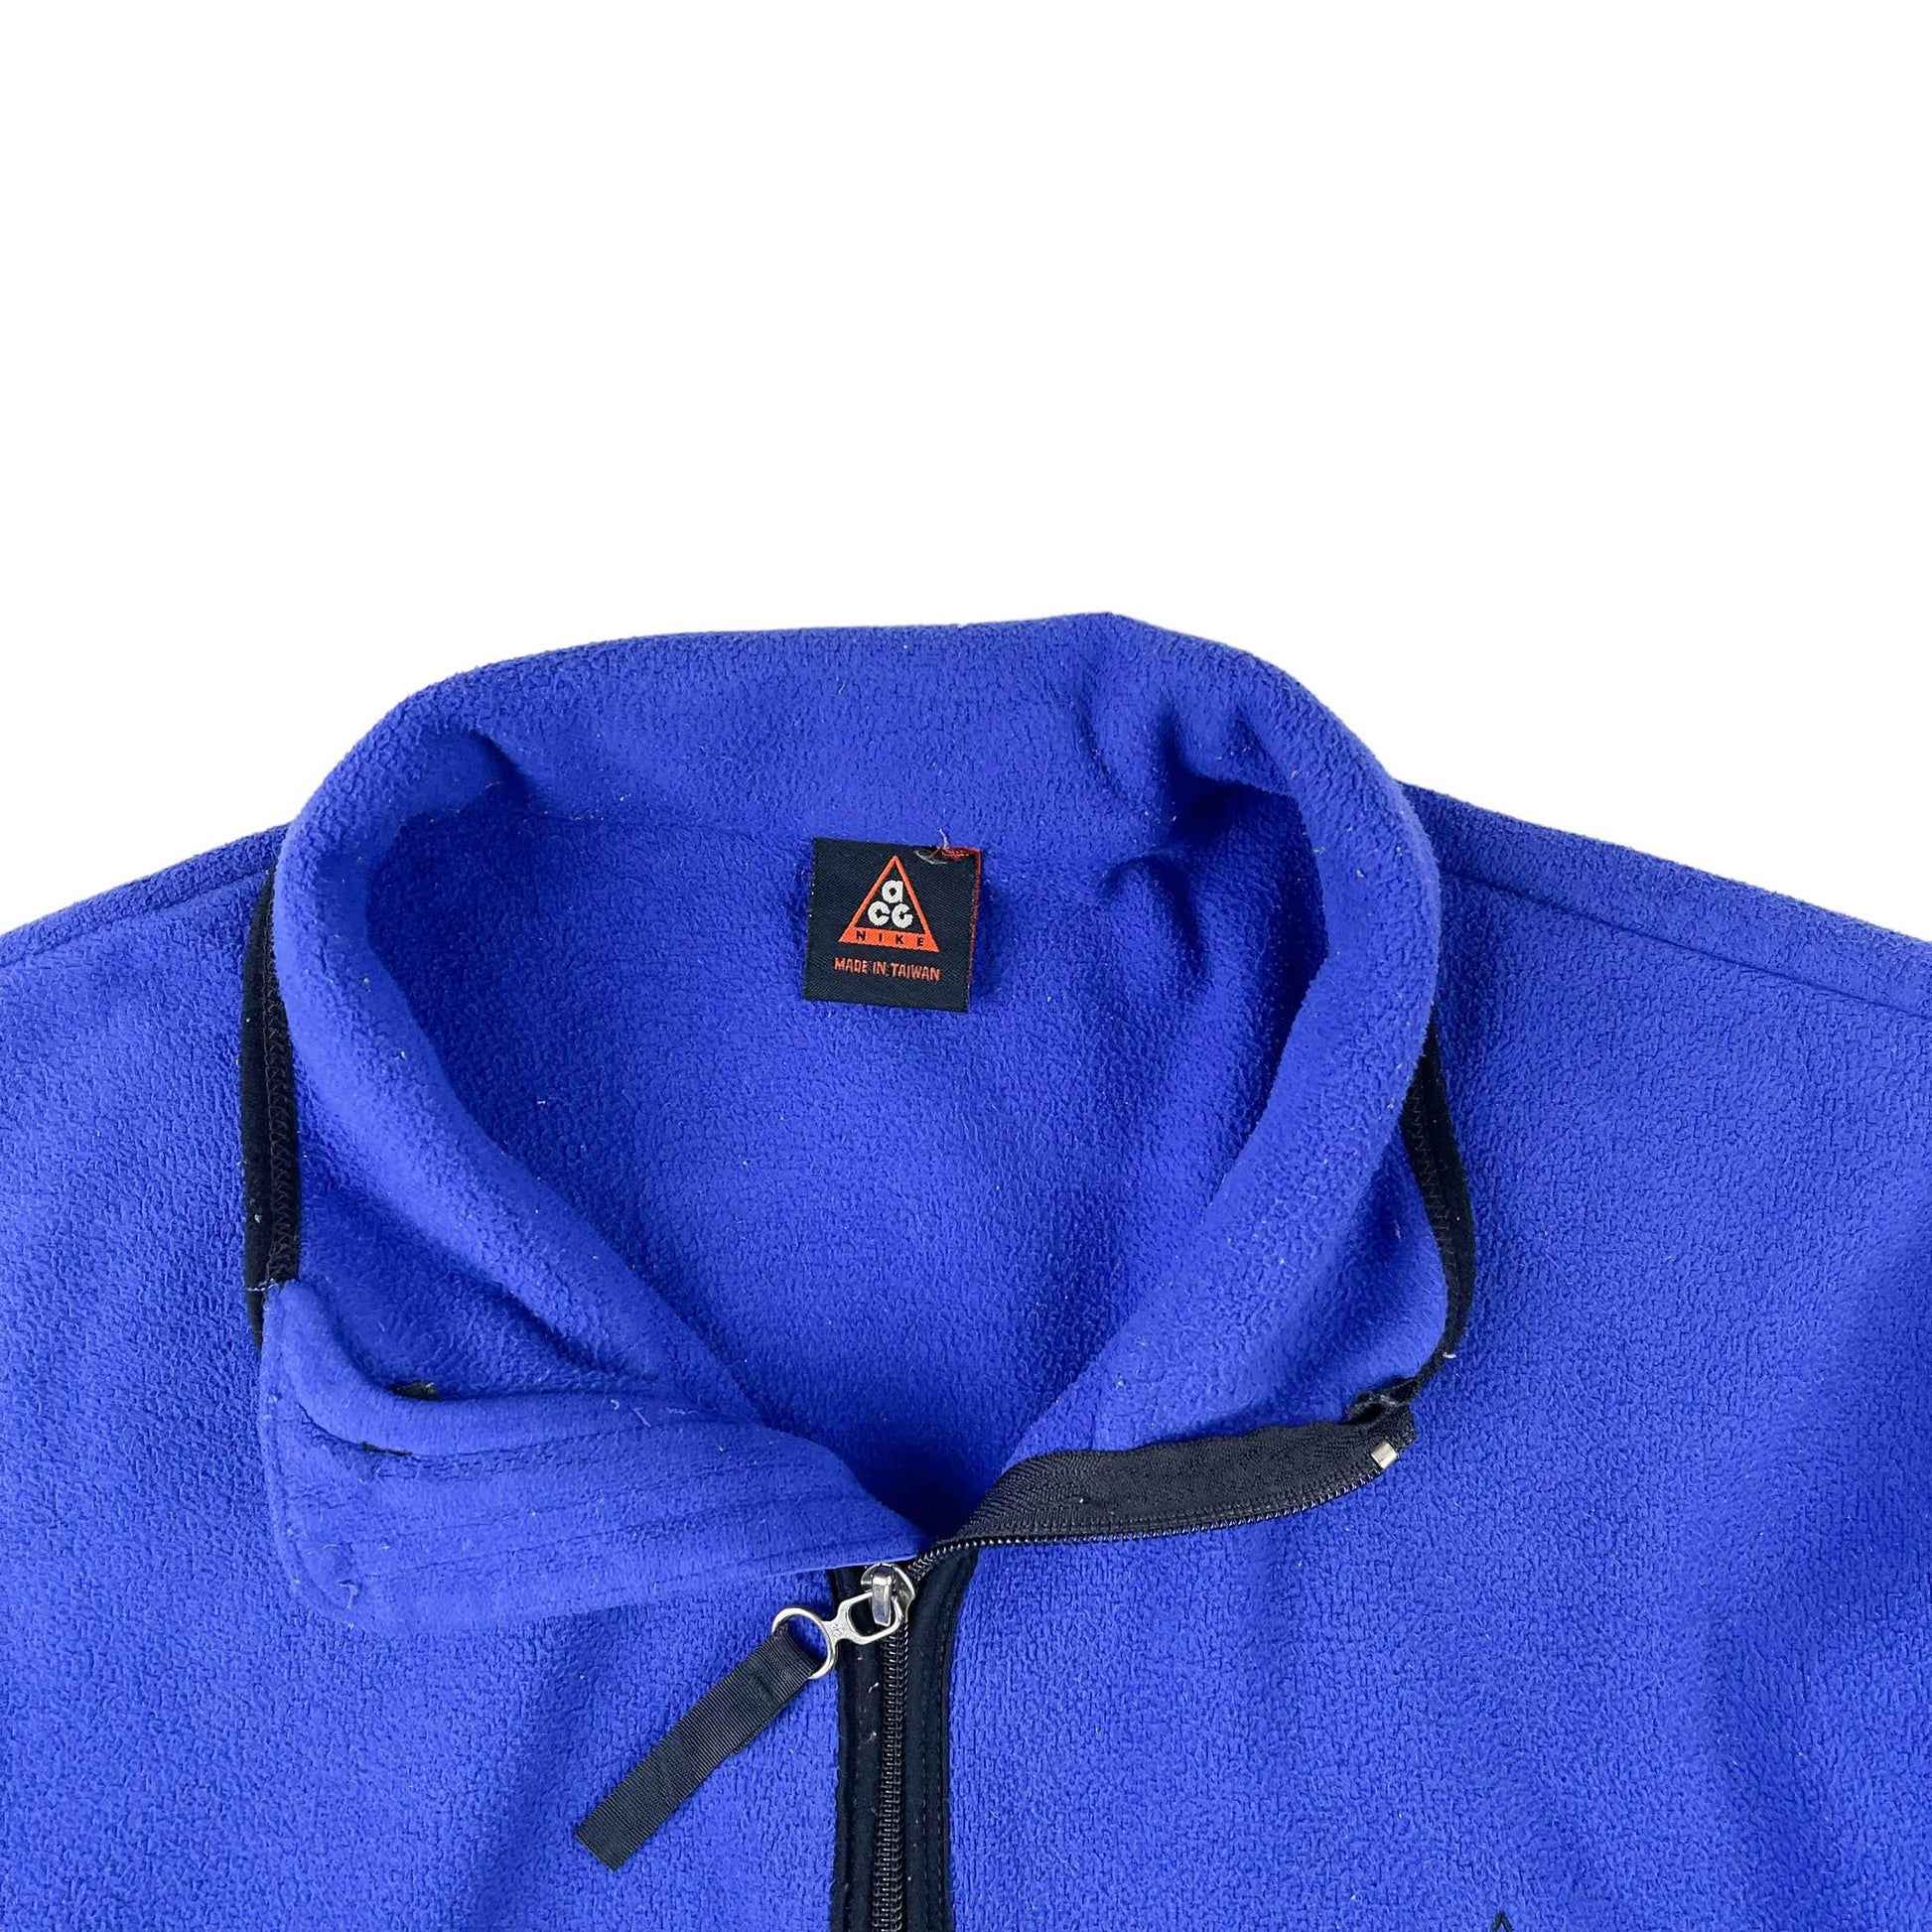 Vintage Nike ACG Therma-Fit Fleece (L) - Known Source